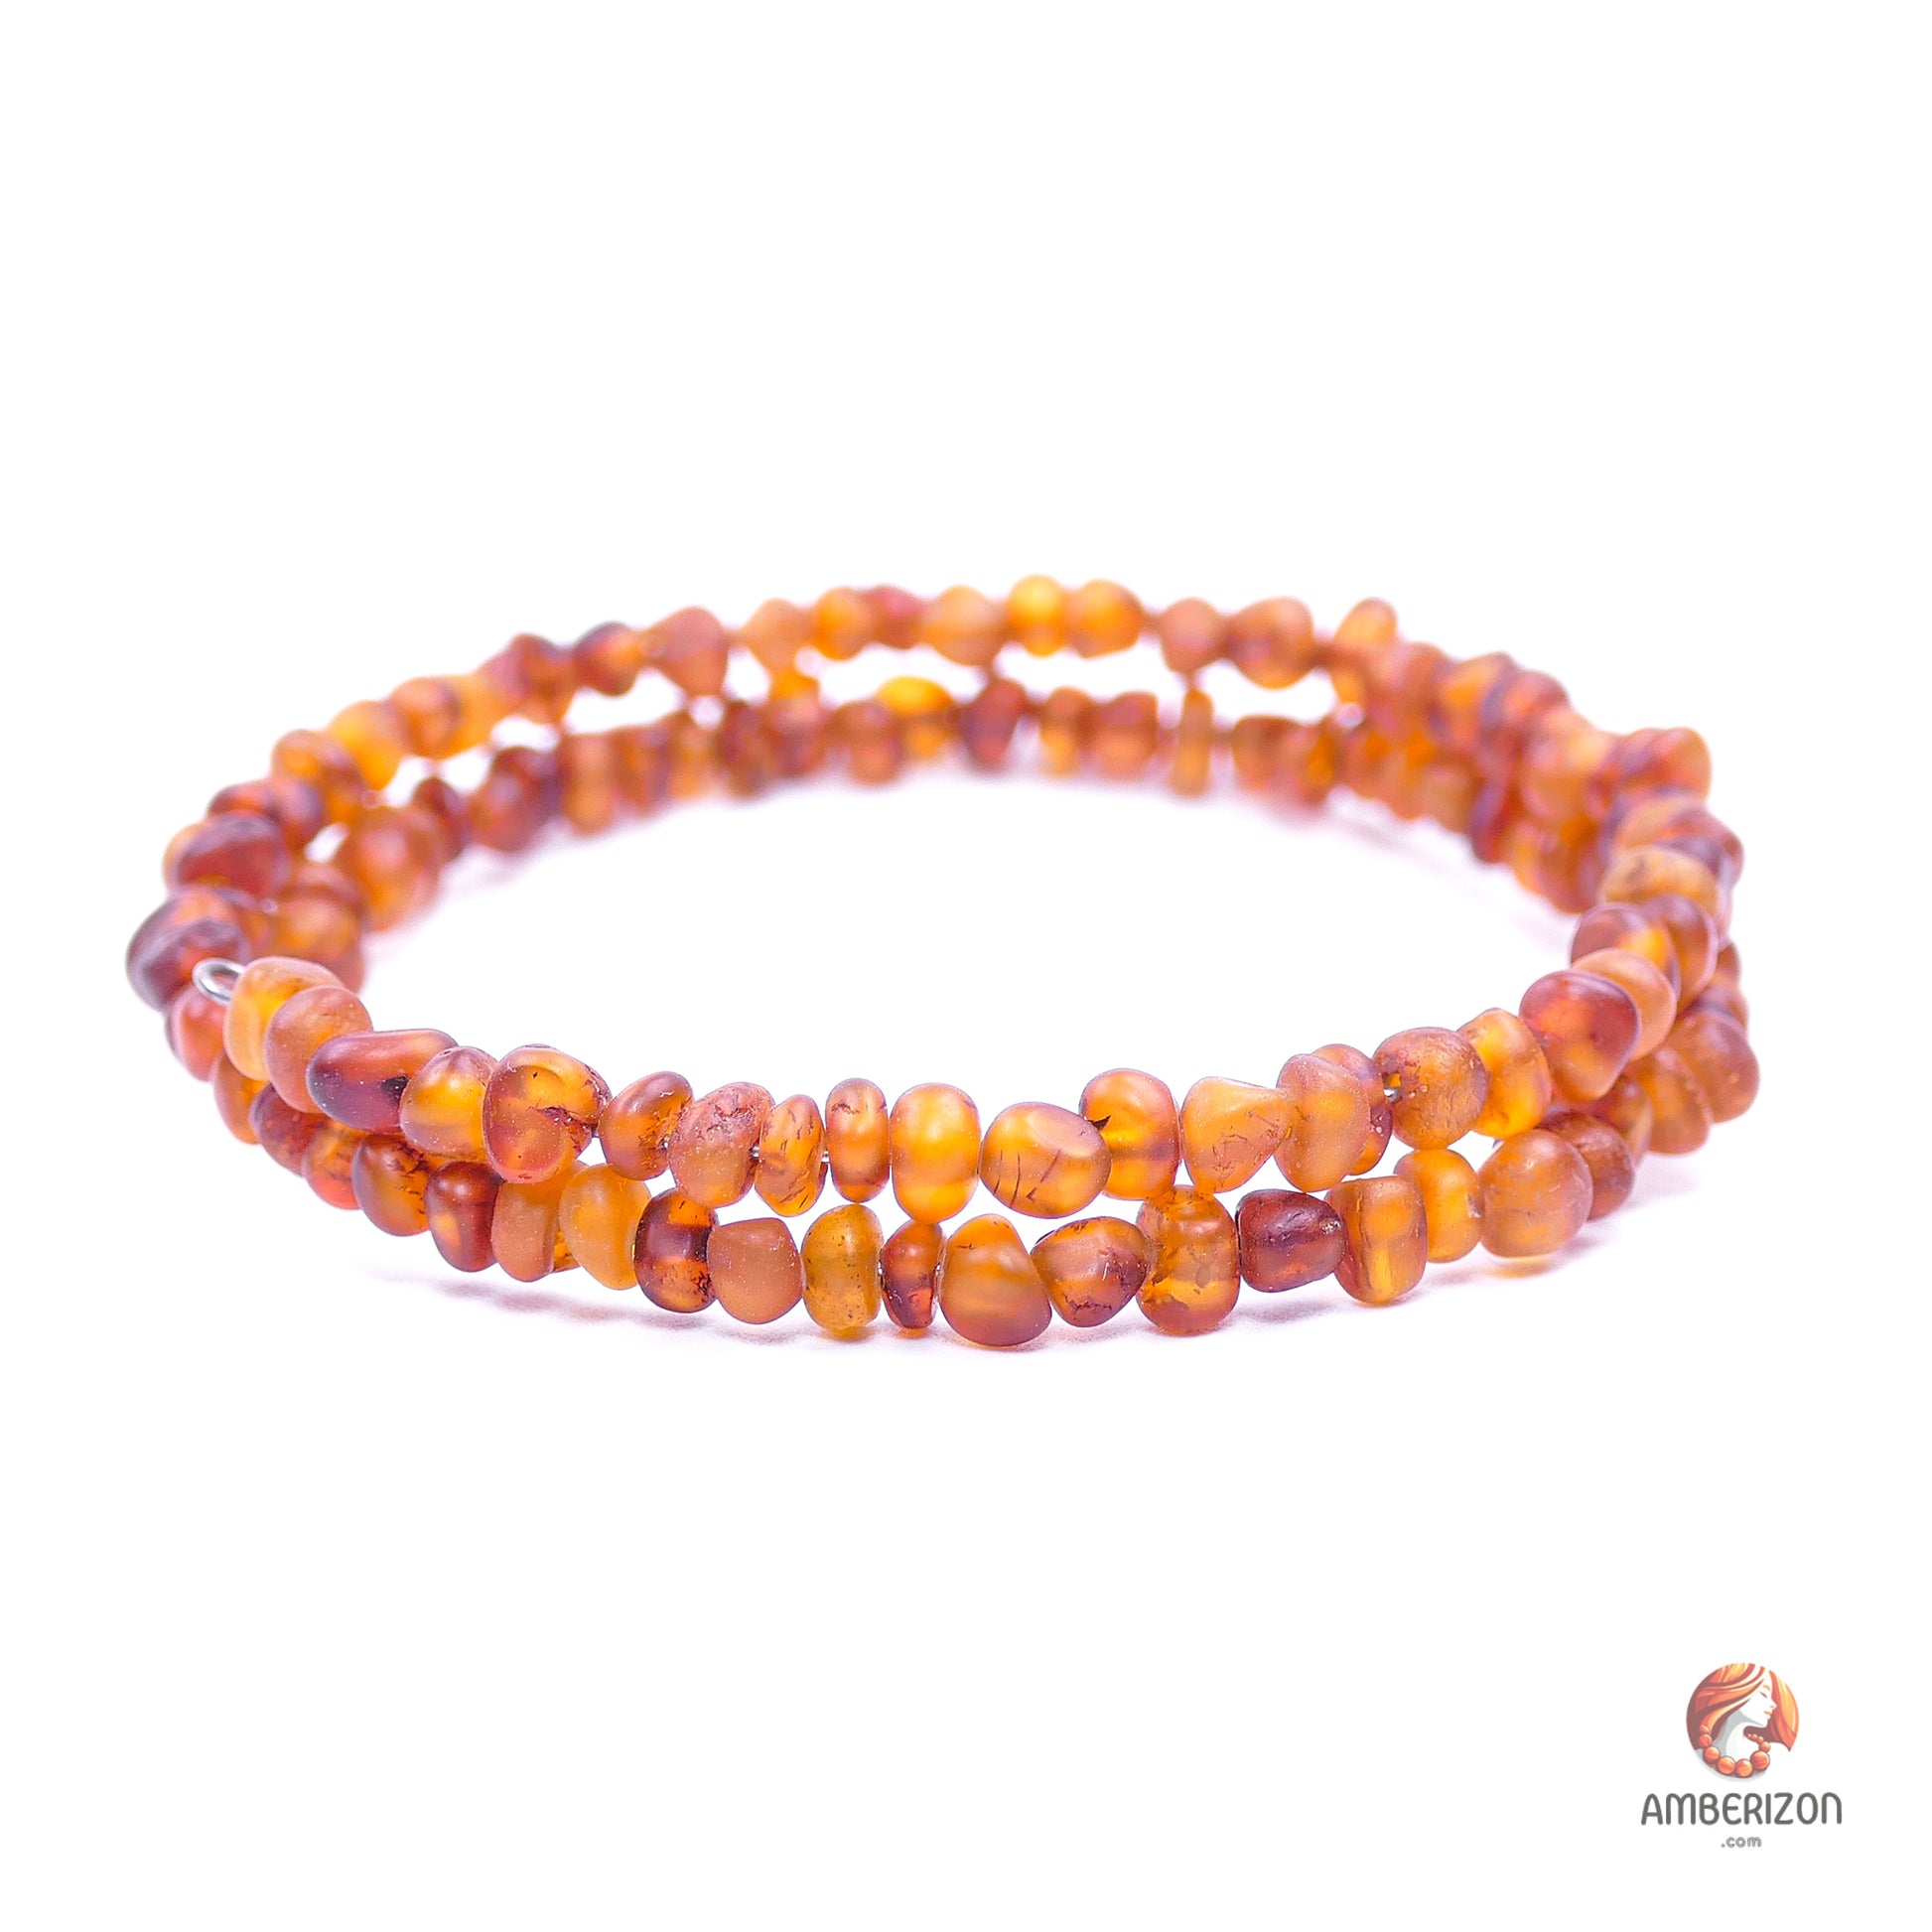 Memory wire Baltic amber bracelet - Red raw unpolished beads